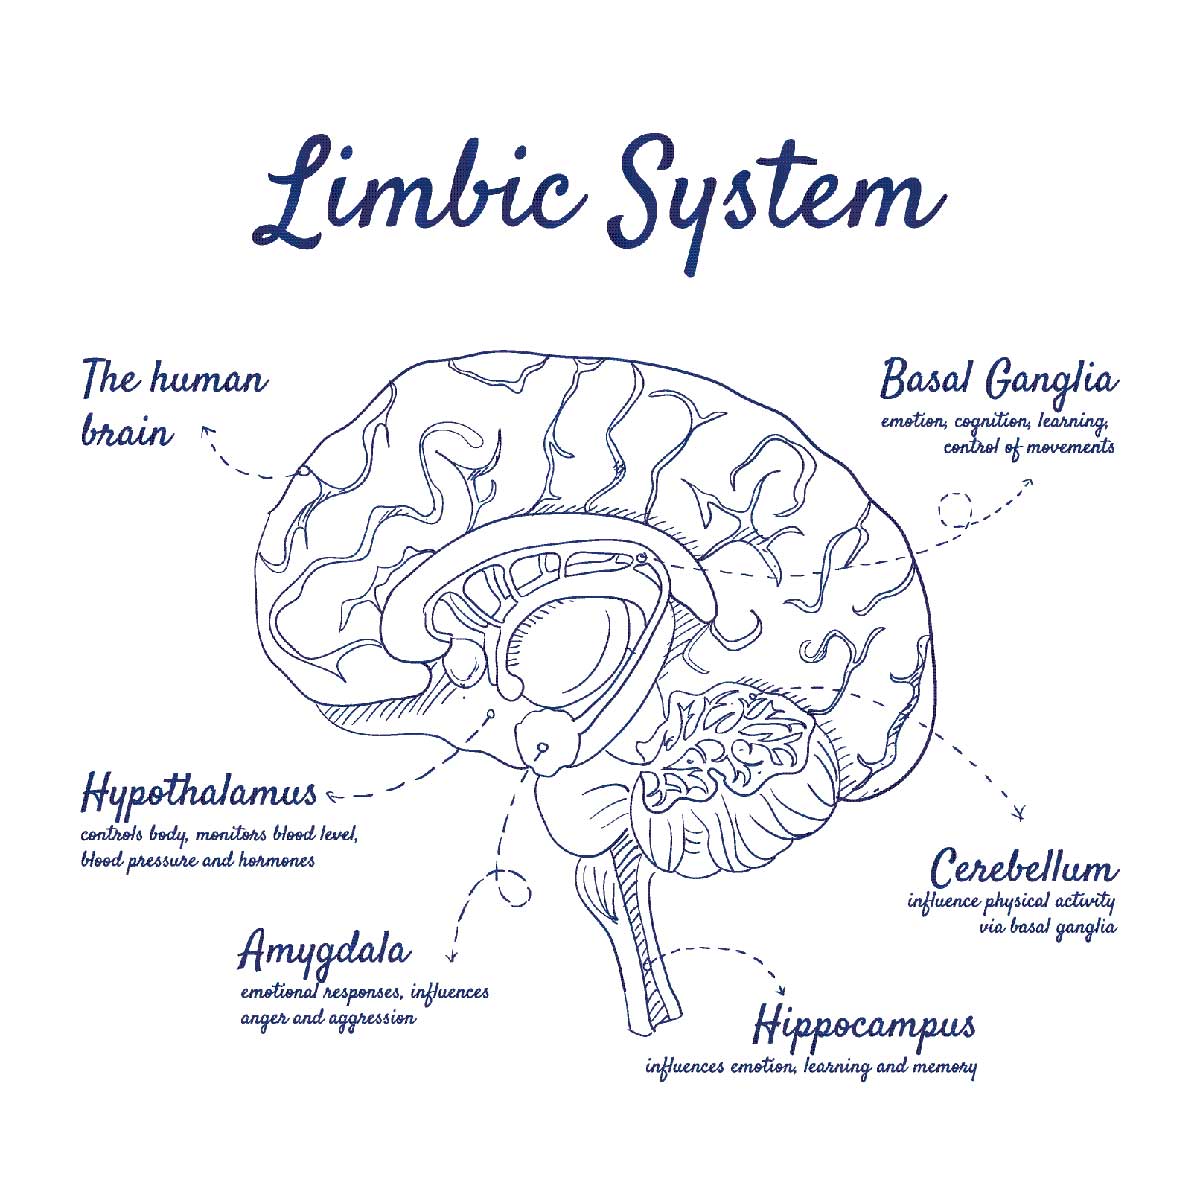 A illustration of the limbic system.